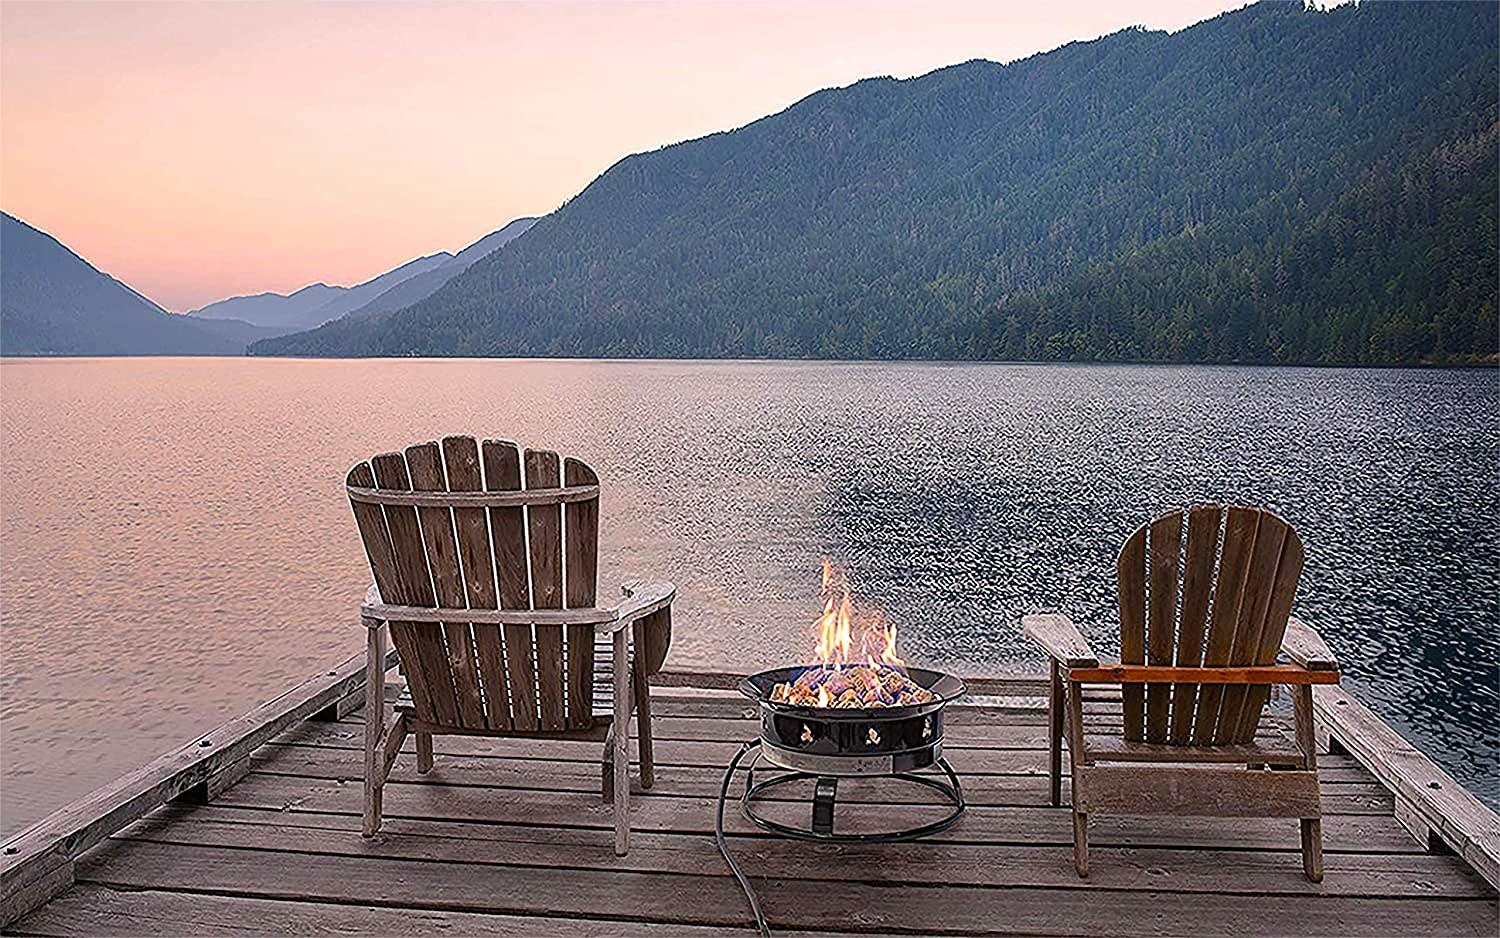 Fire pit on a dock by the lake in the middle of two chairs